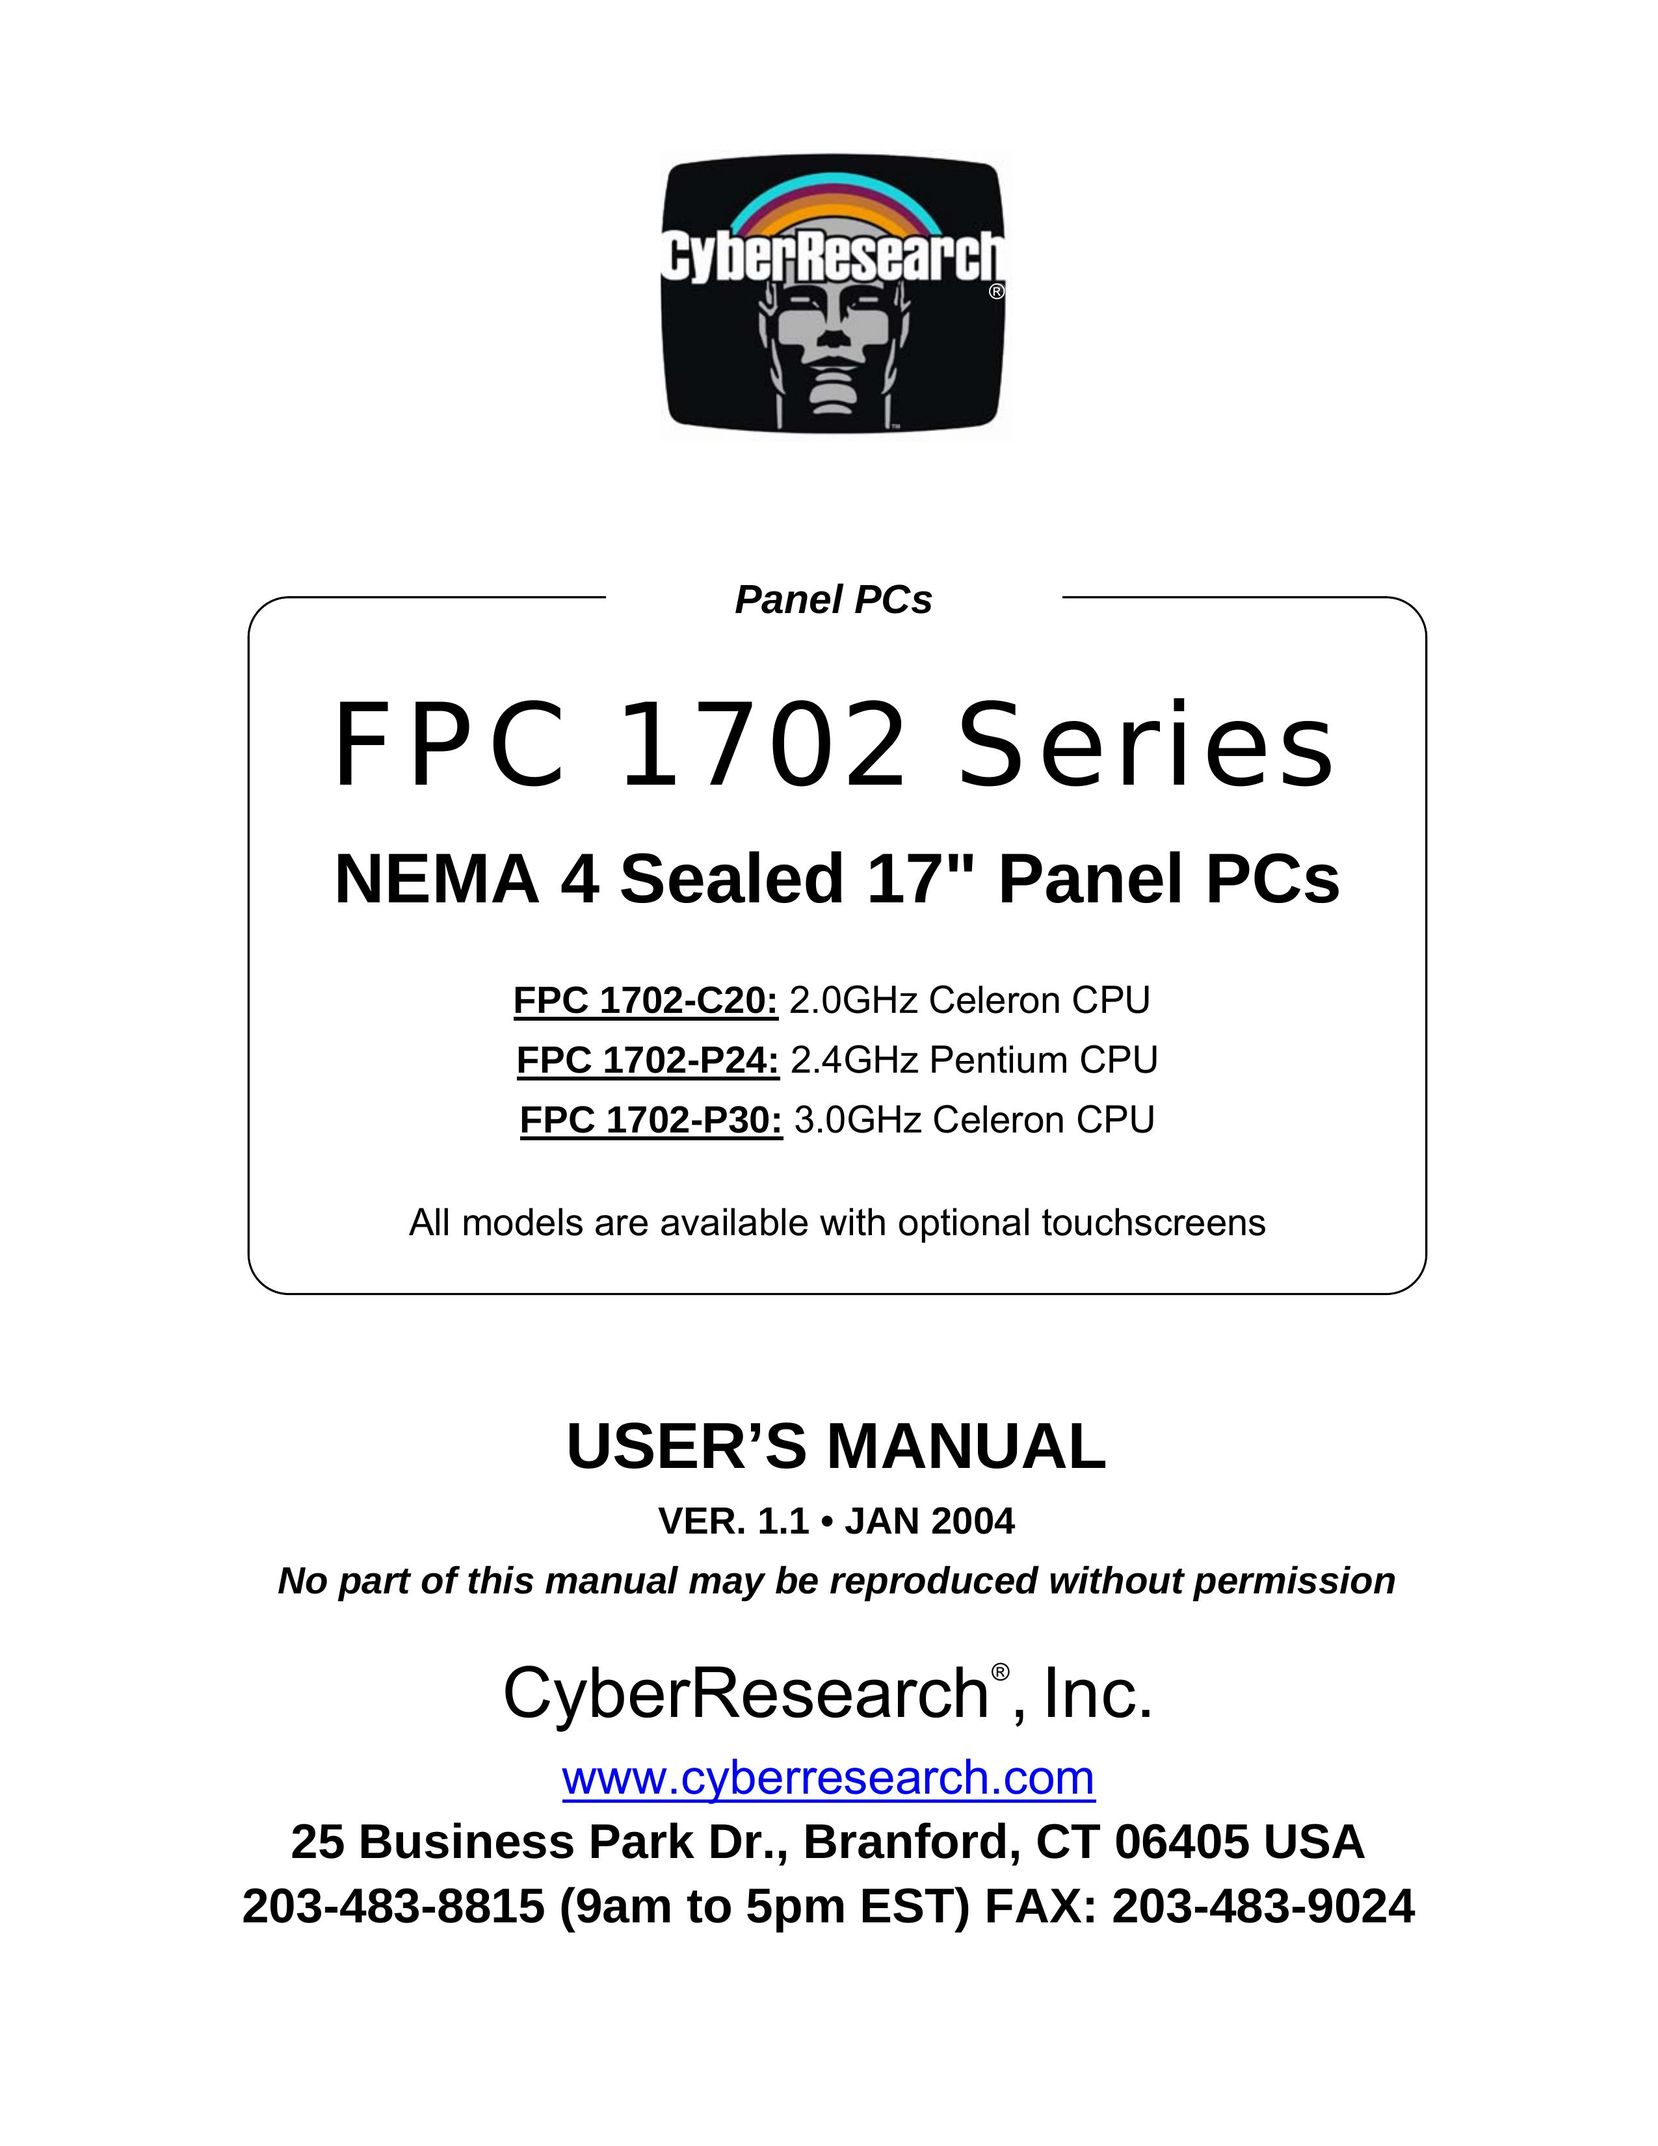 CyberResearch FPC 1702-C20 Personal Computer User Manual